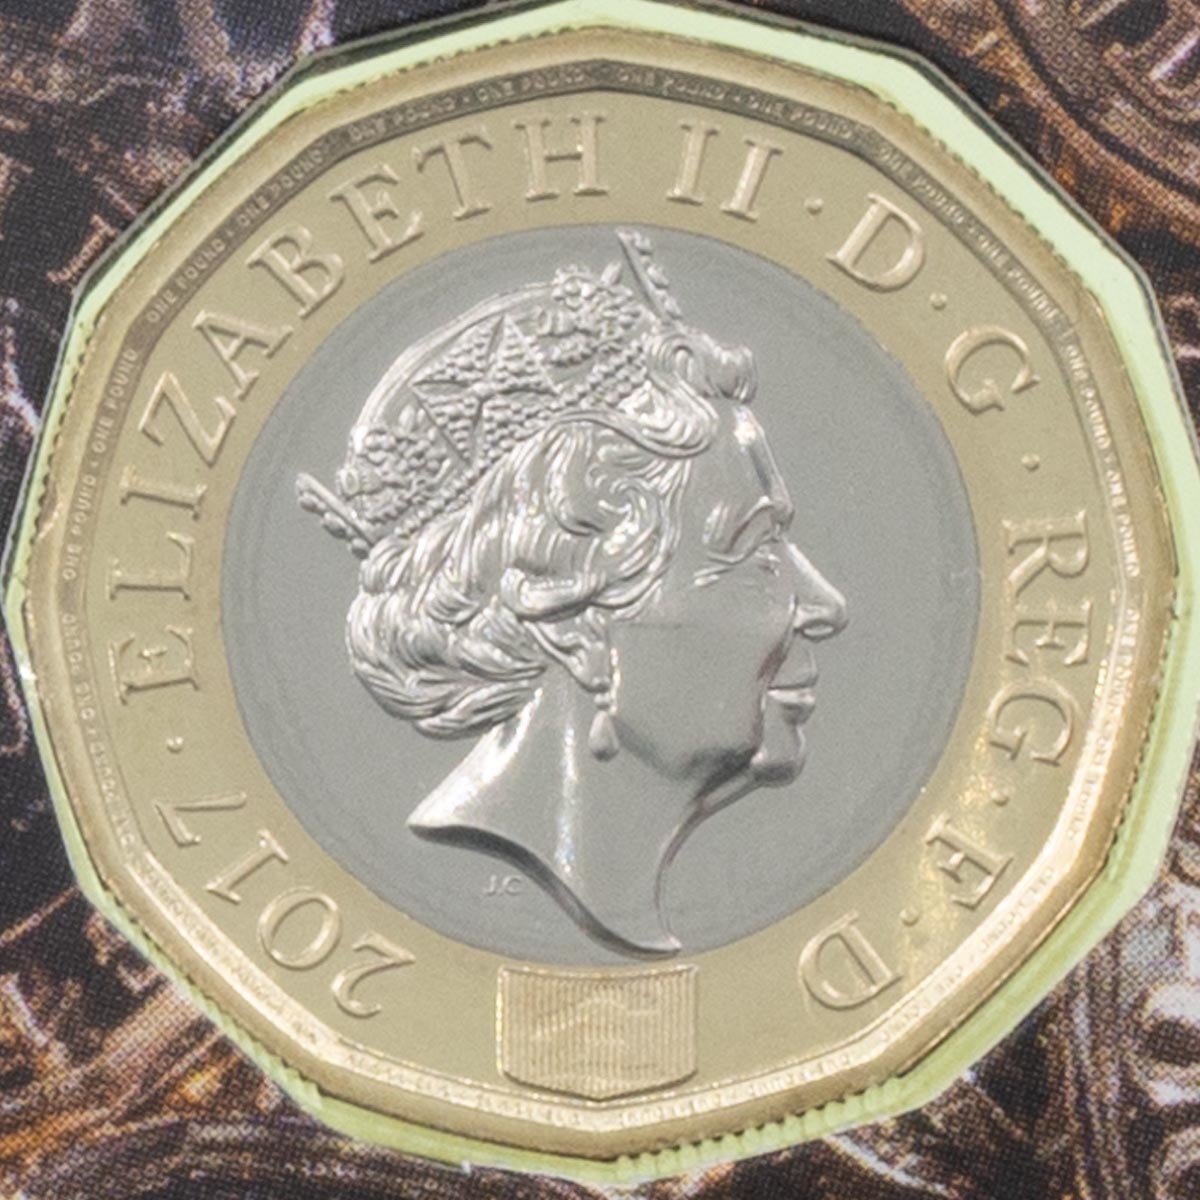 Uk17D1BU 2017 Nations Of The Crown One Pound Brilliant Uncirculated Coin In Folder Obverse